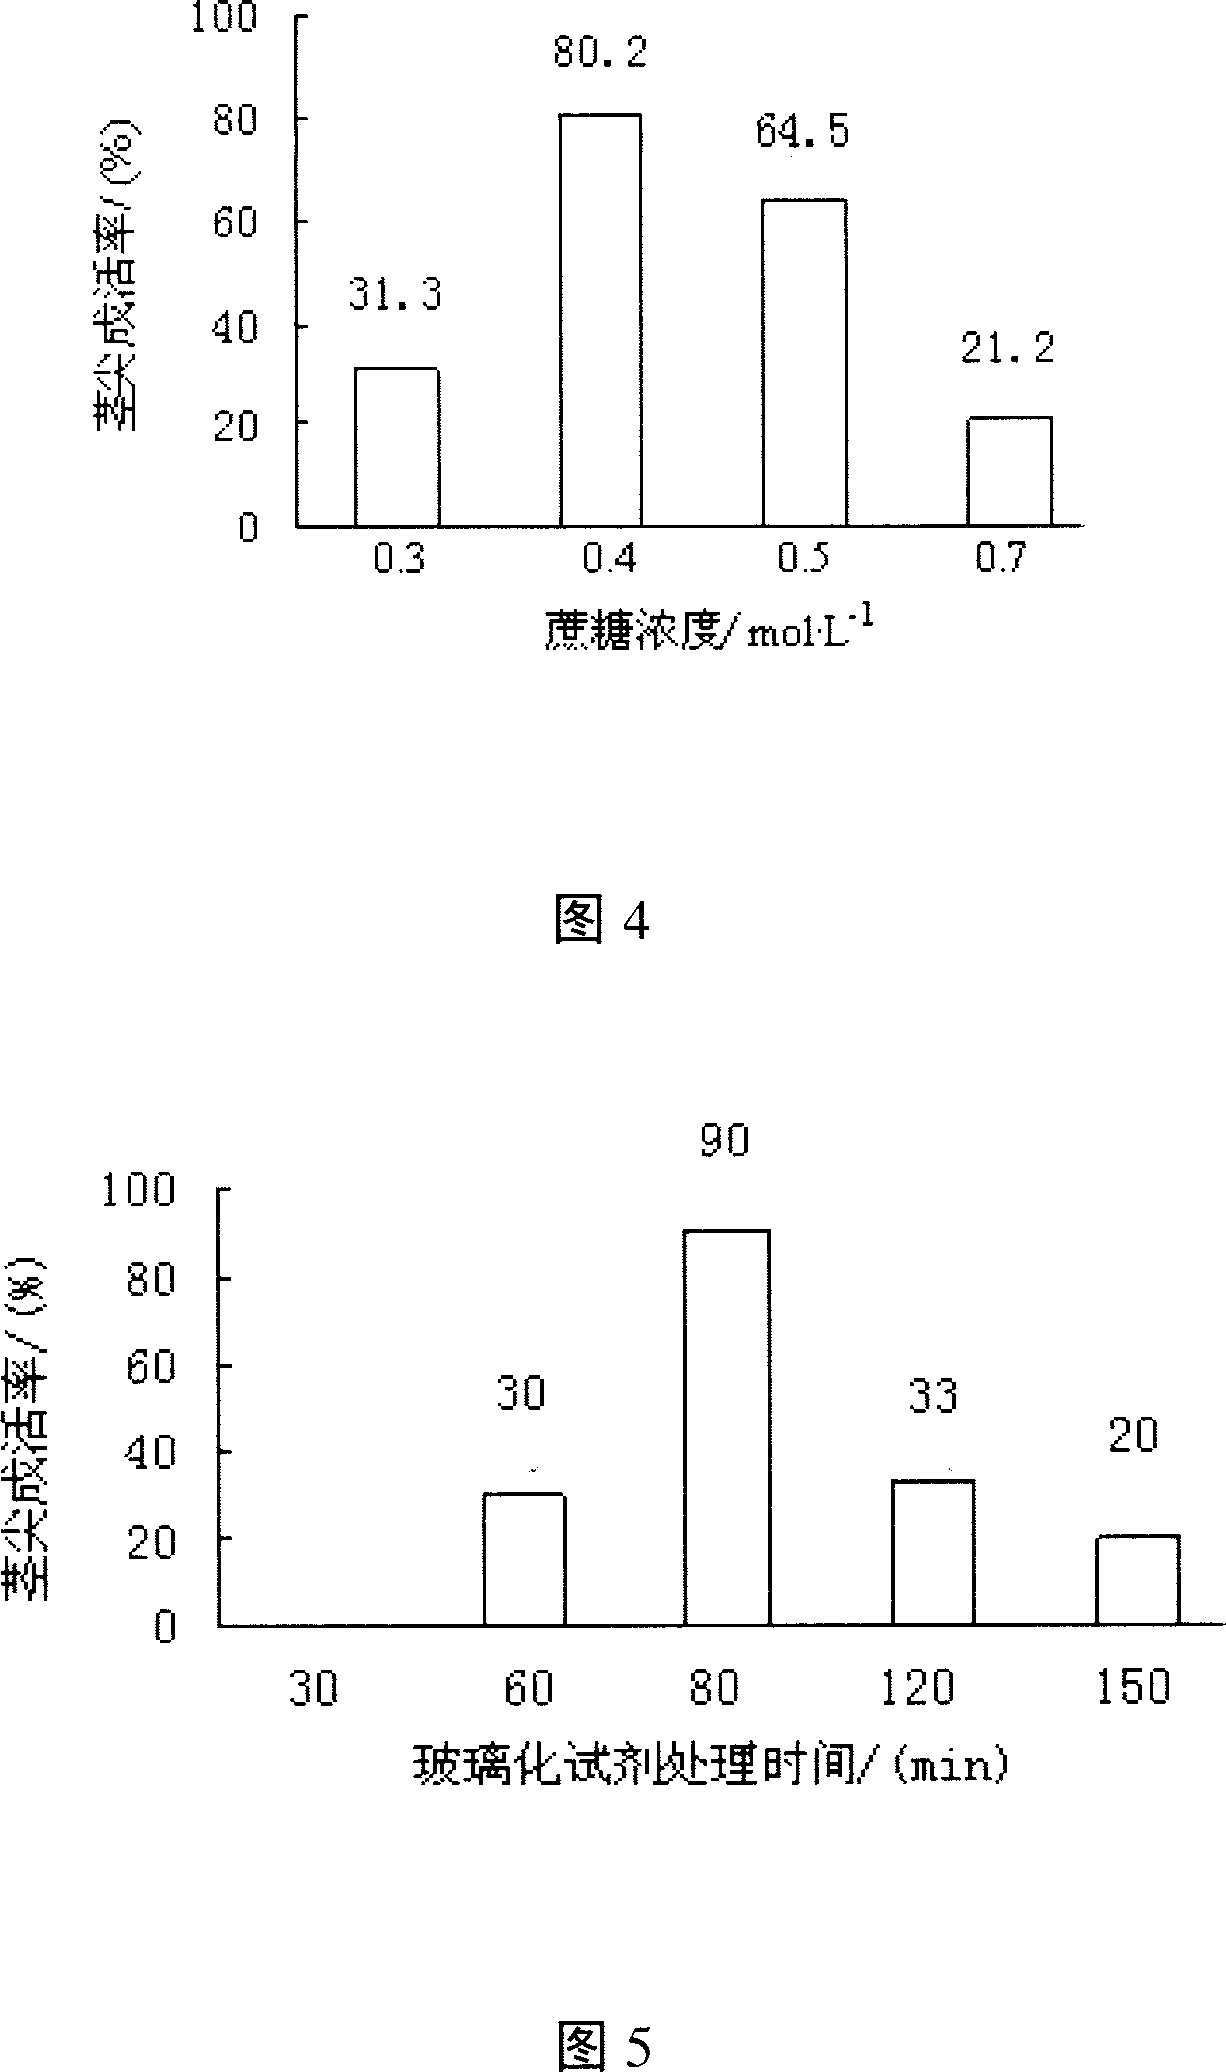 Ultra-low temperature preserving method for nutrient breeding flower and short-tube lycoris